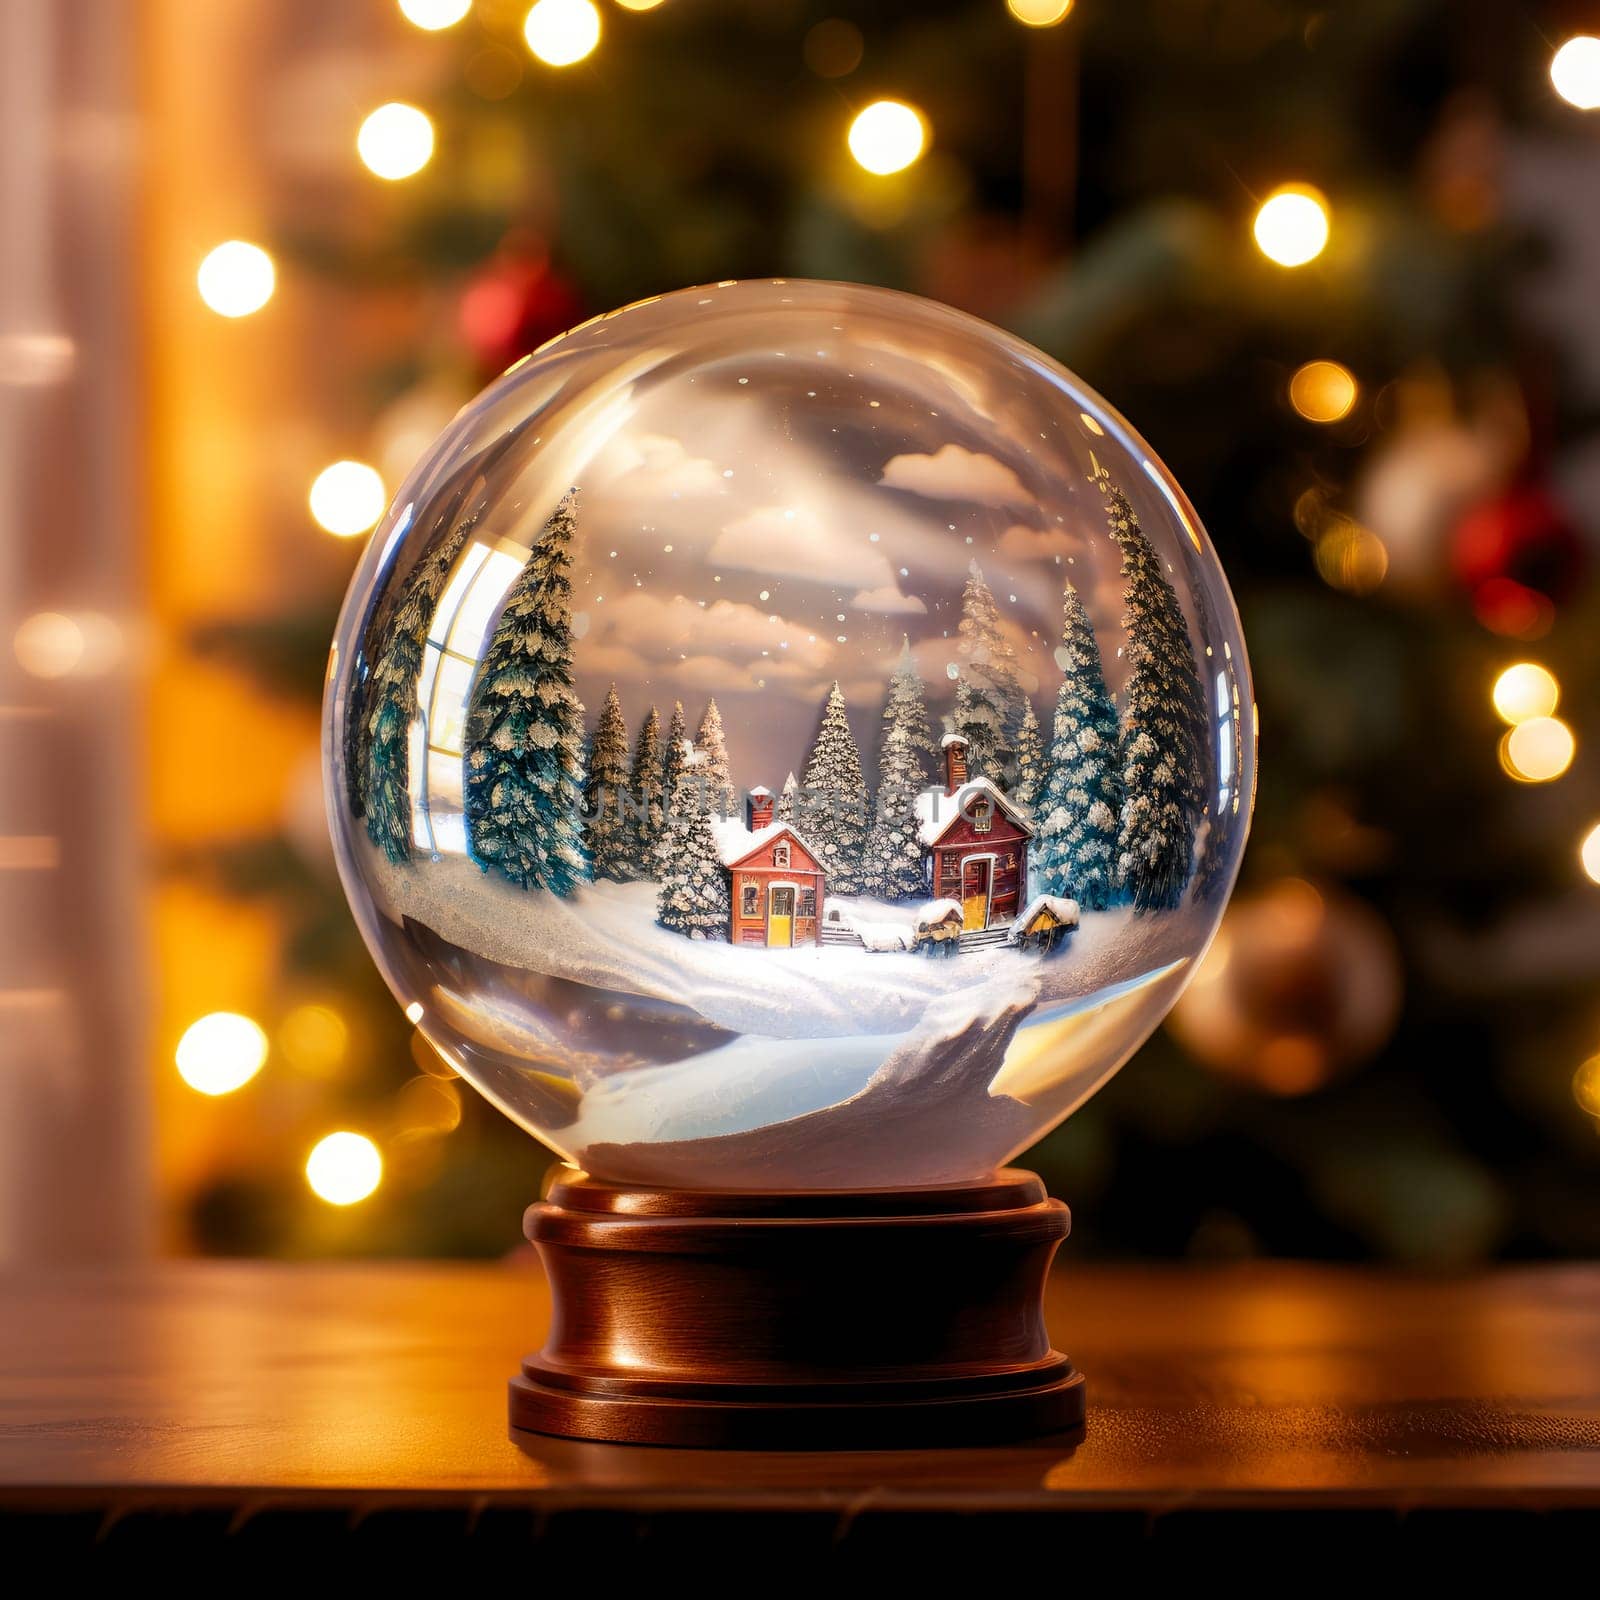 winter landscape with road and a snowstorm, spruce house, in a glass Christmas globe. The background is exquisite bokeh by Ramanouskaya